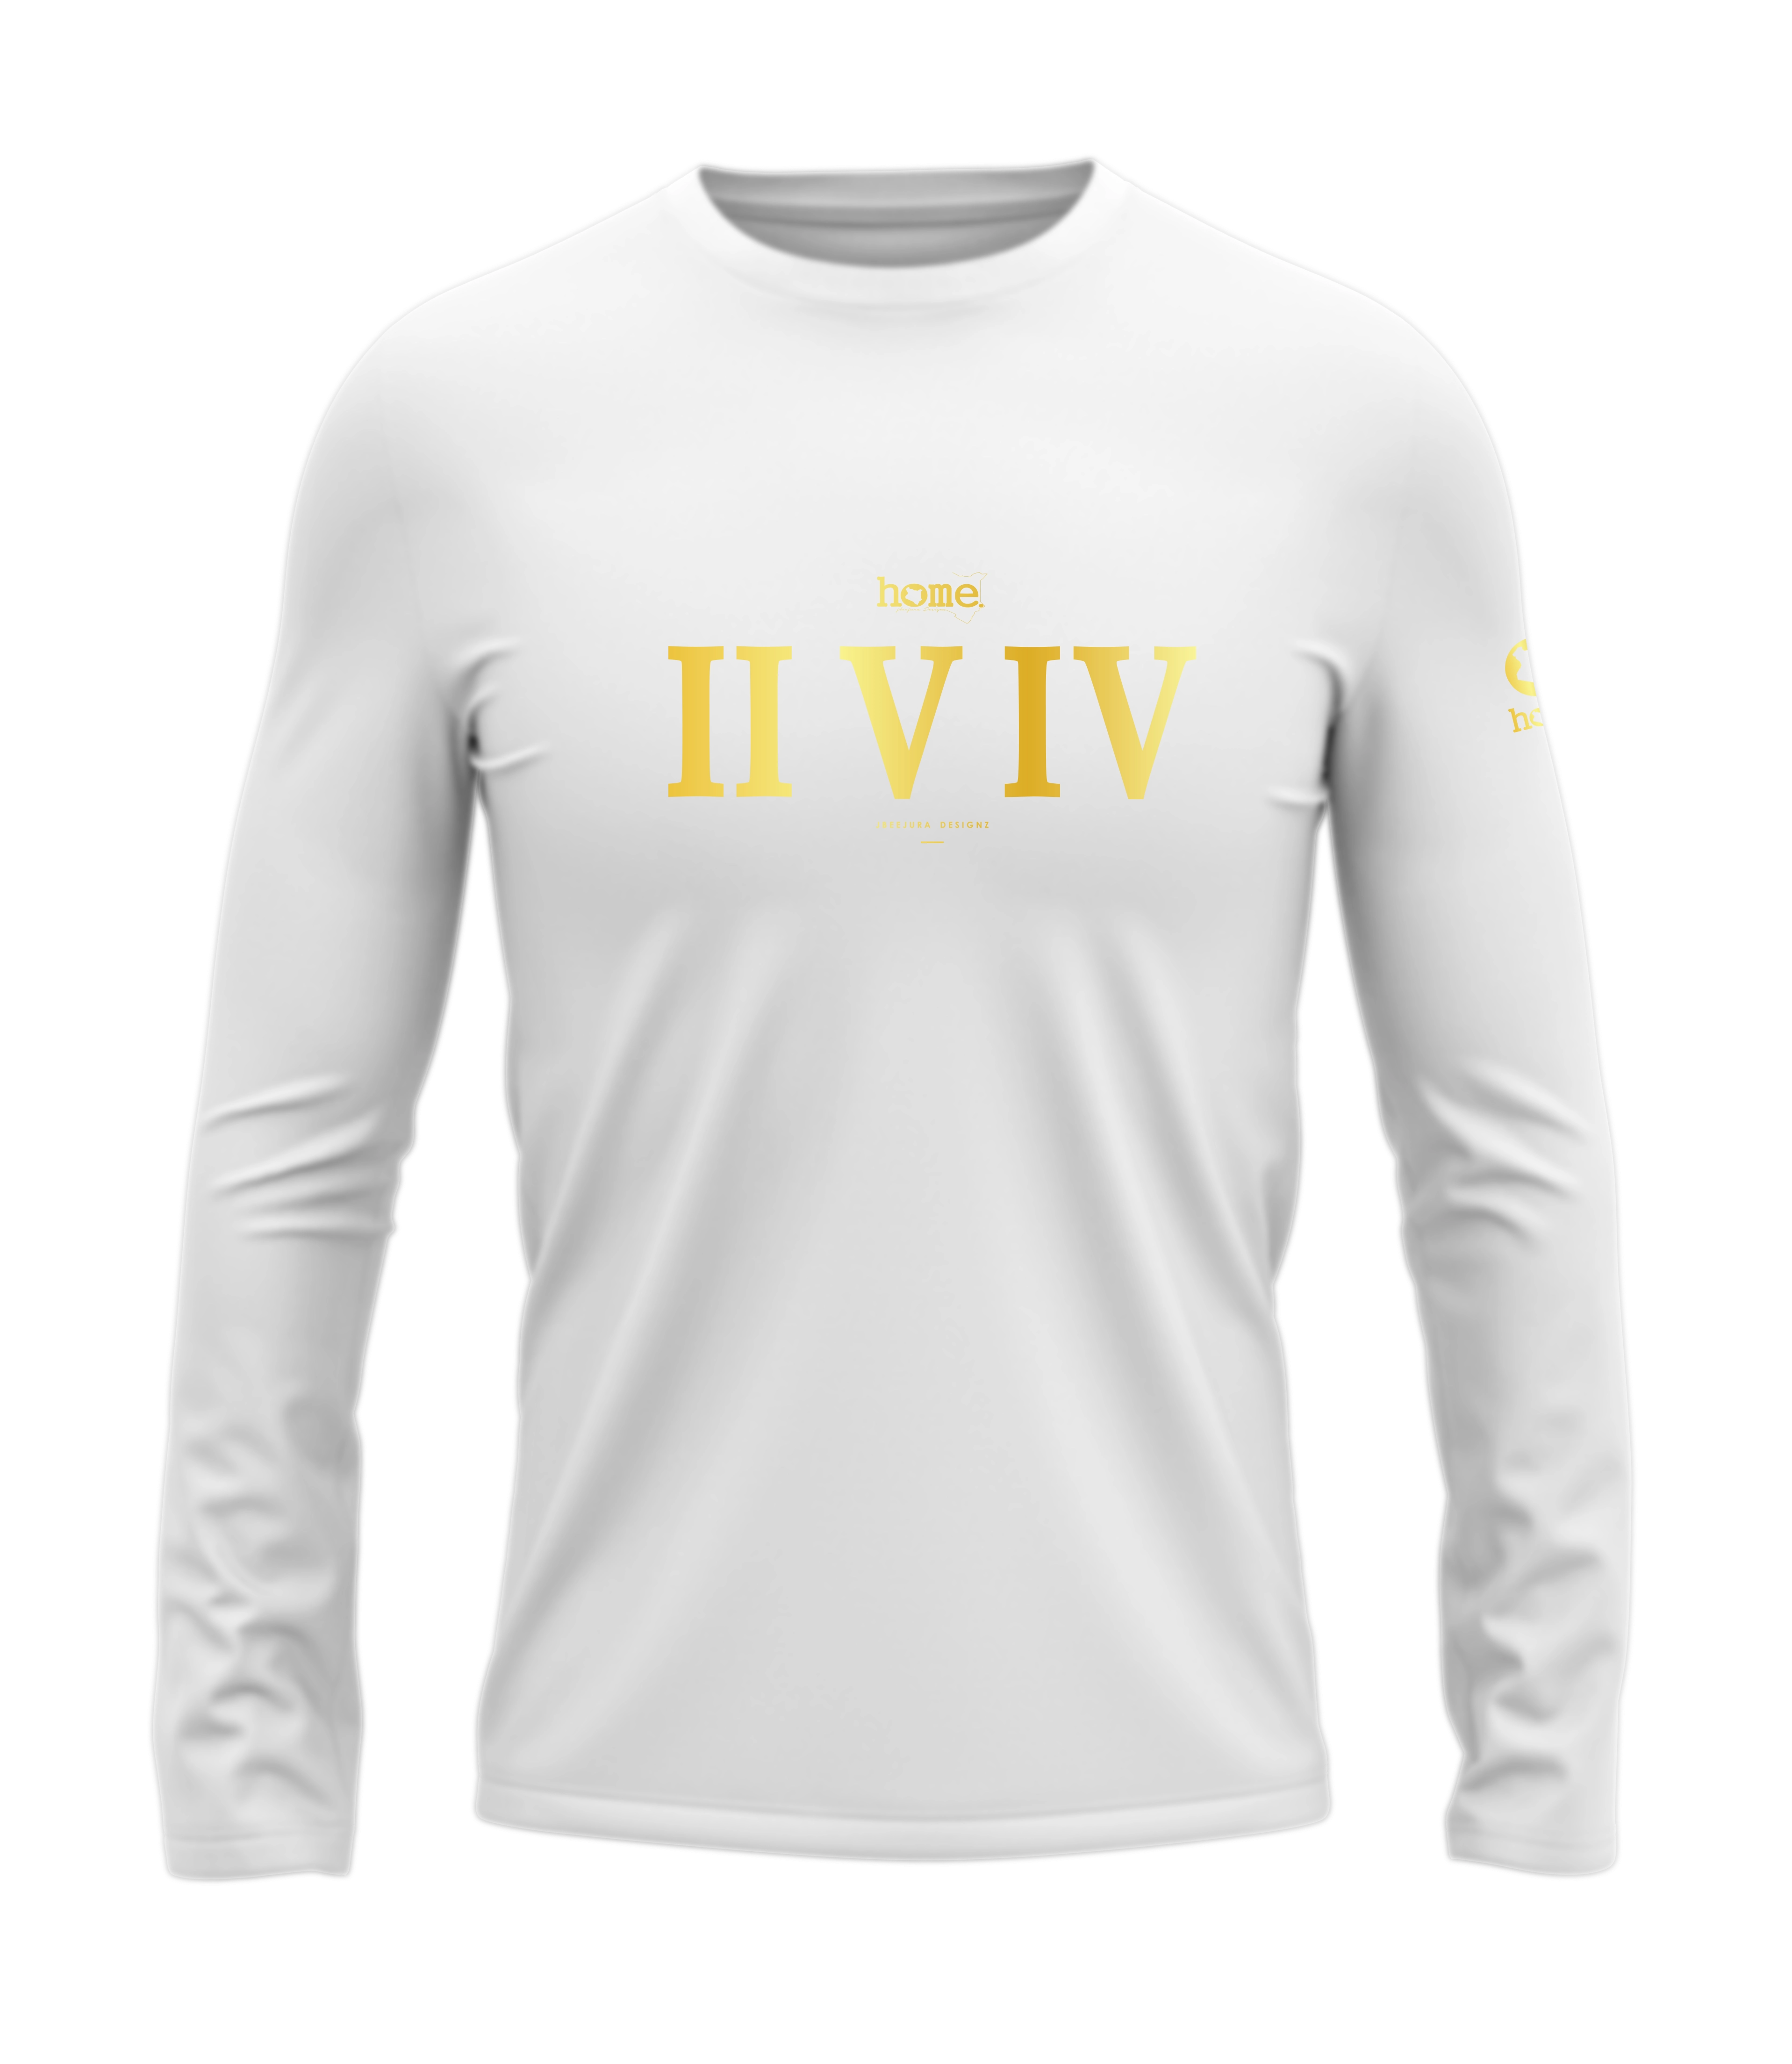 home_254 LONG-SLEEVED WHITE T-SHIRT WITH A GOLD ROMAN NUMERALS PRINT – COTTON PLUS FABRIC